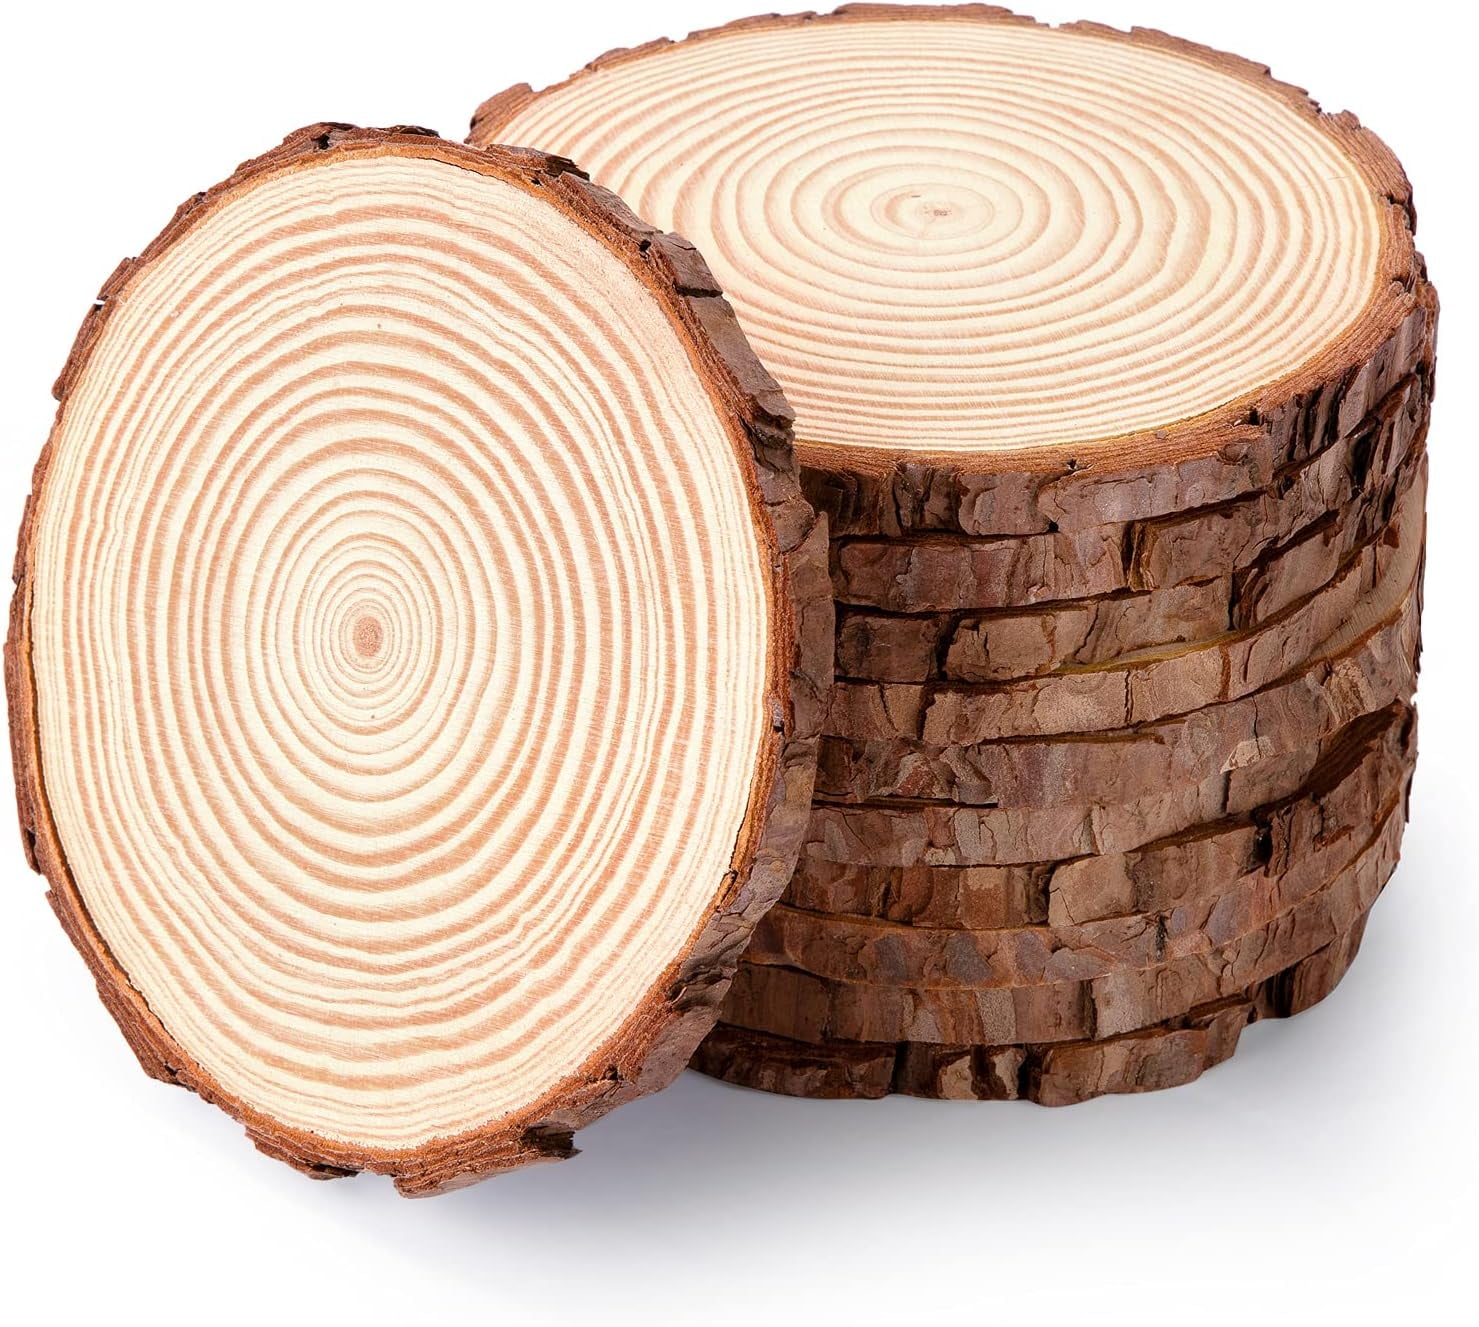 Set of 10 Wood Slices for centerpieces! Wood Slice centerpieces, Wood  Rounds, Tree Slices (11 inch)